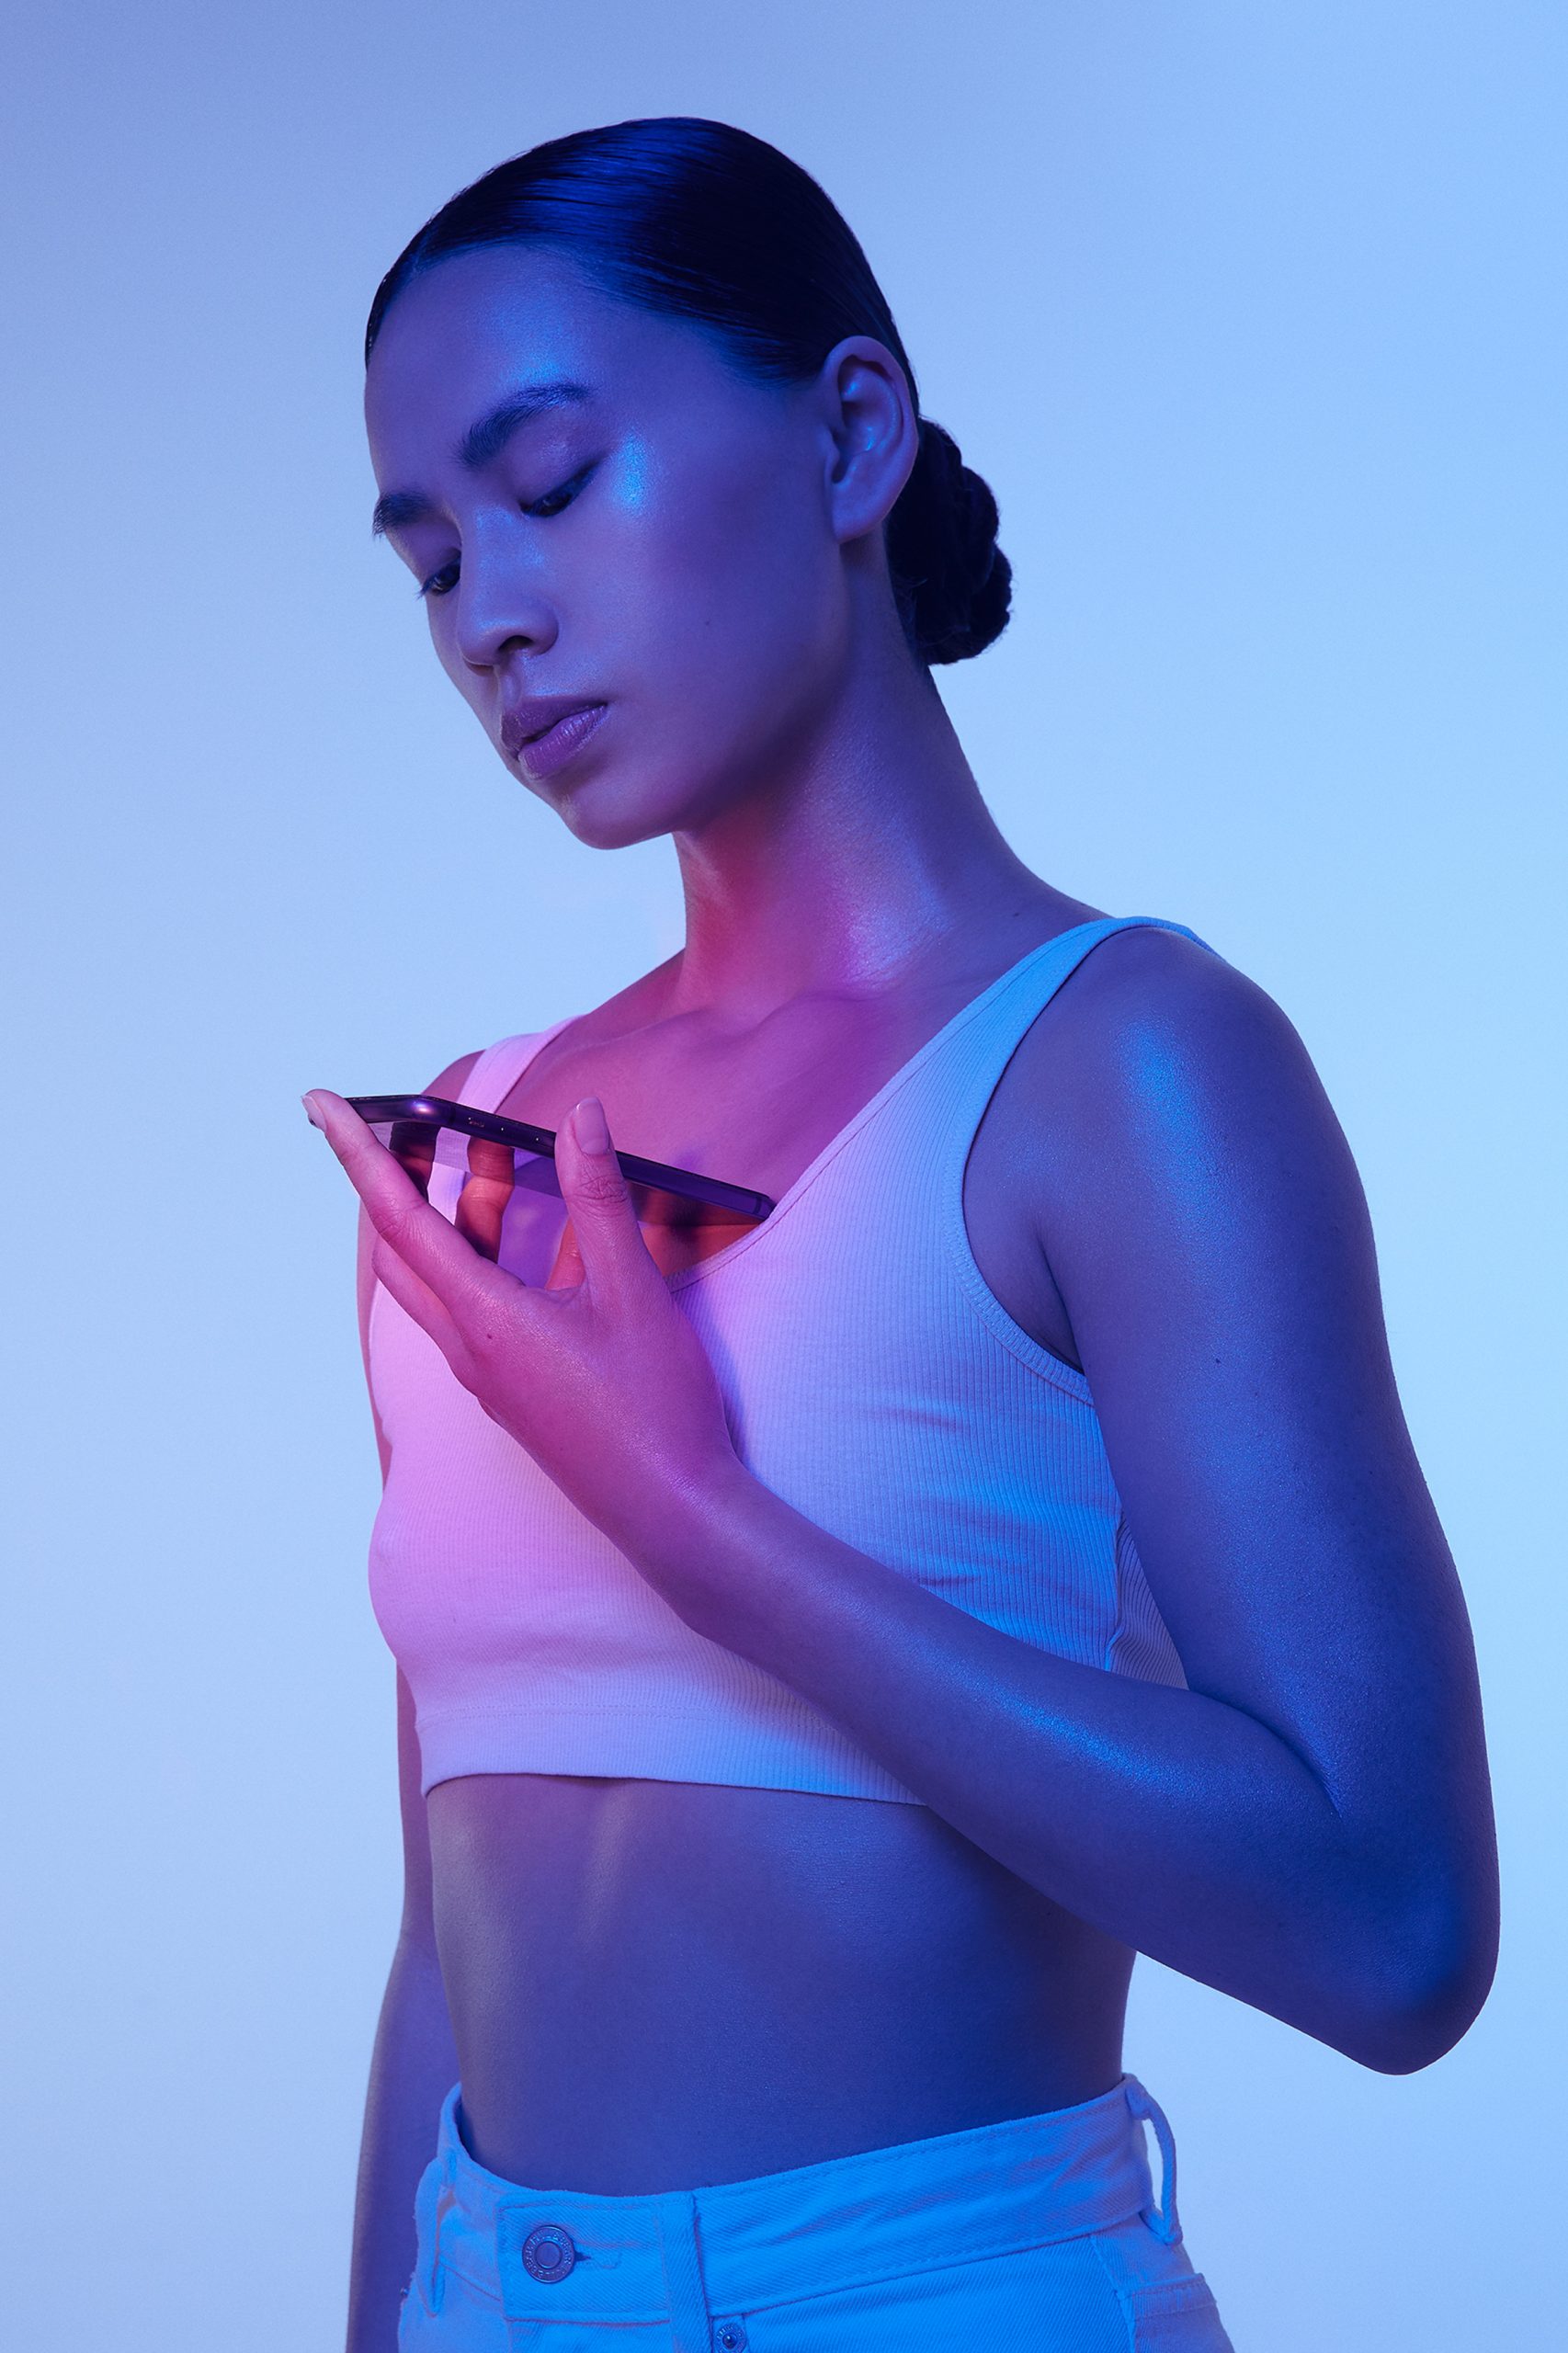 Woman holds glowing phone to her chest